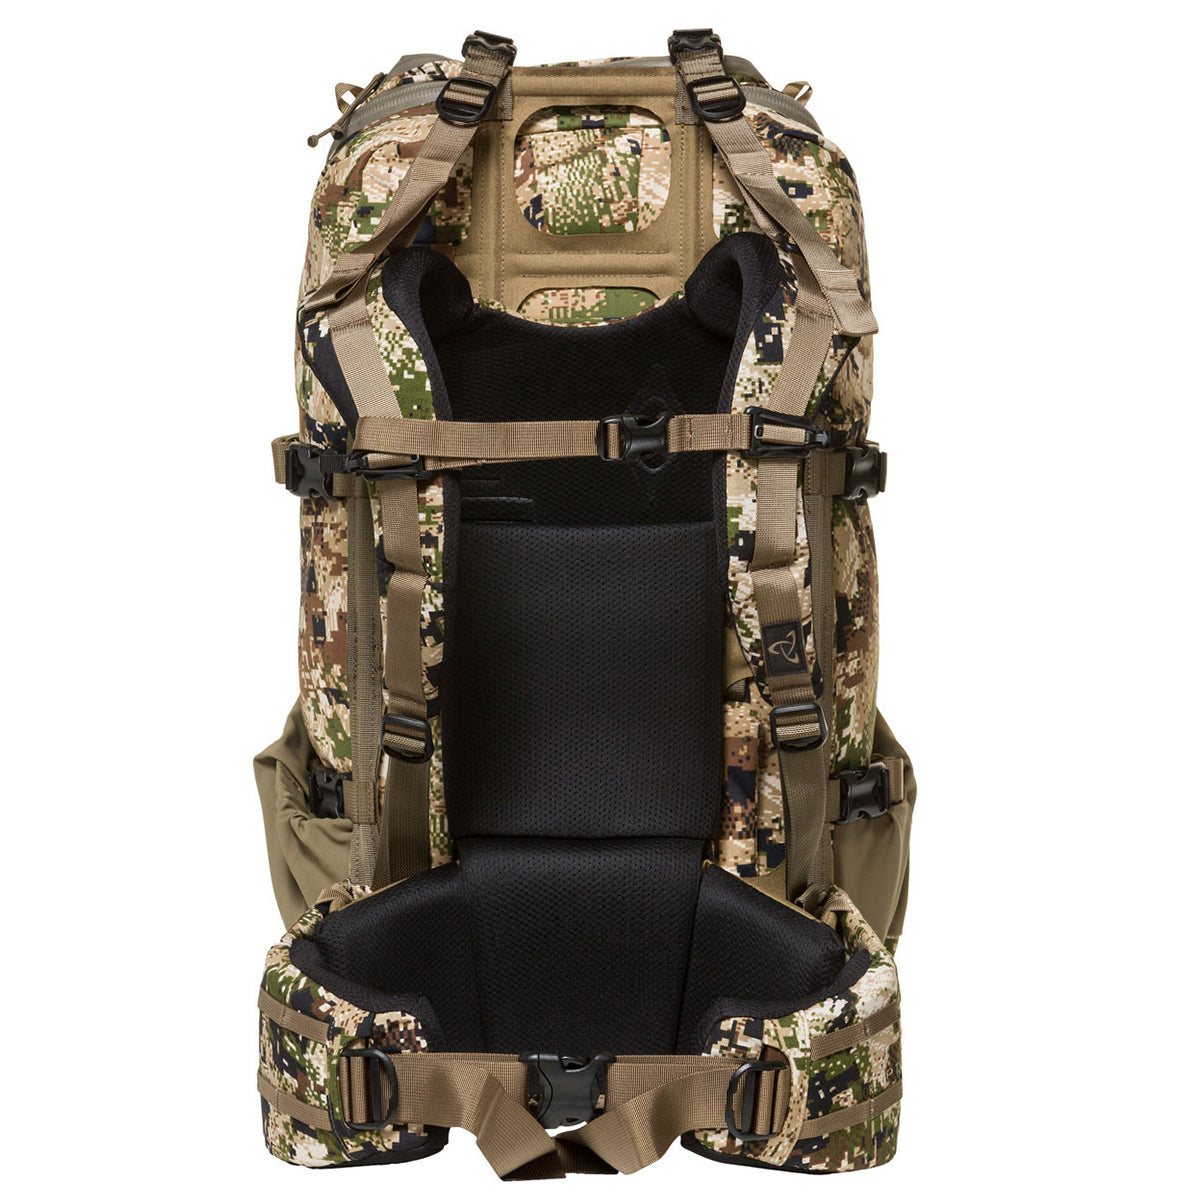 Mystery Ranch Sawtooth 45 Backpack in Mystery Ranch Sawtooth 45 Backpack (2020) by Mystery Ranch | Gear - goHUNT Shop by GOHUNT | Mystery Ranch - GOHUNT Shop